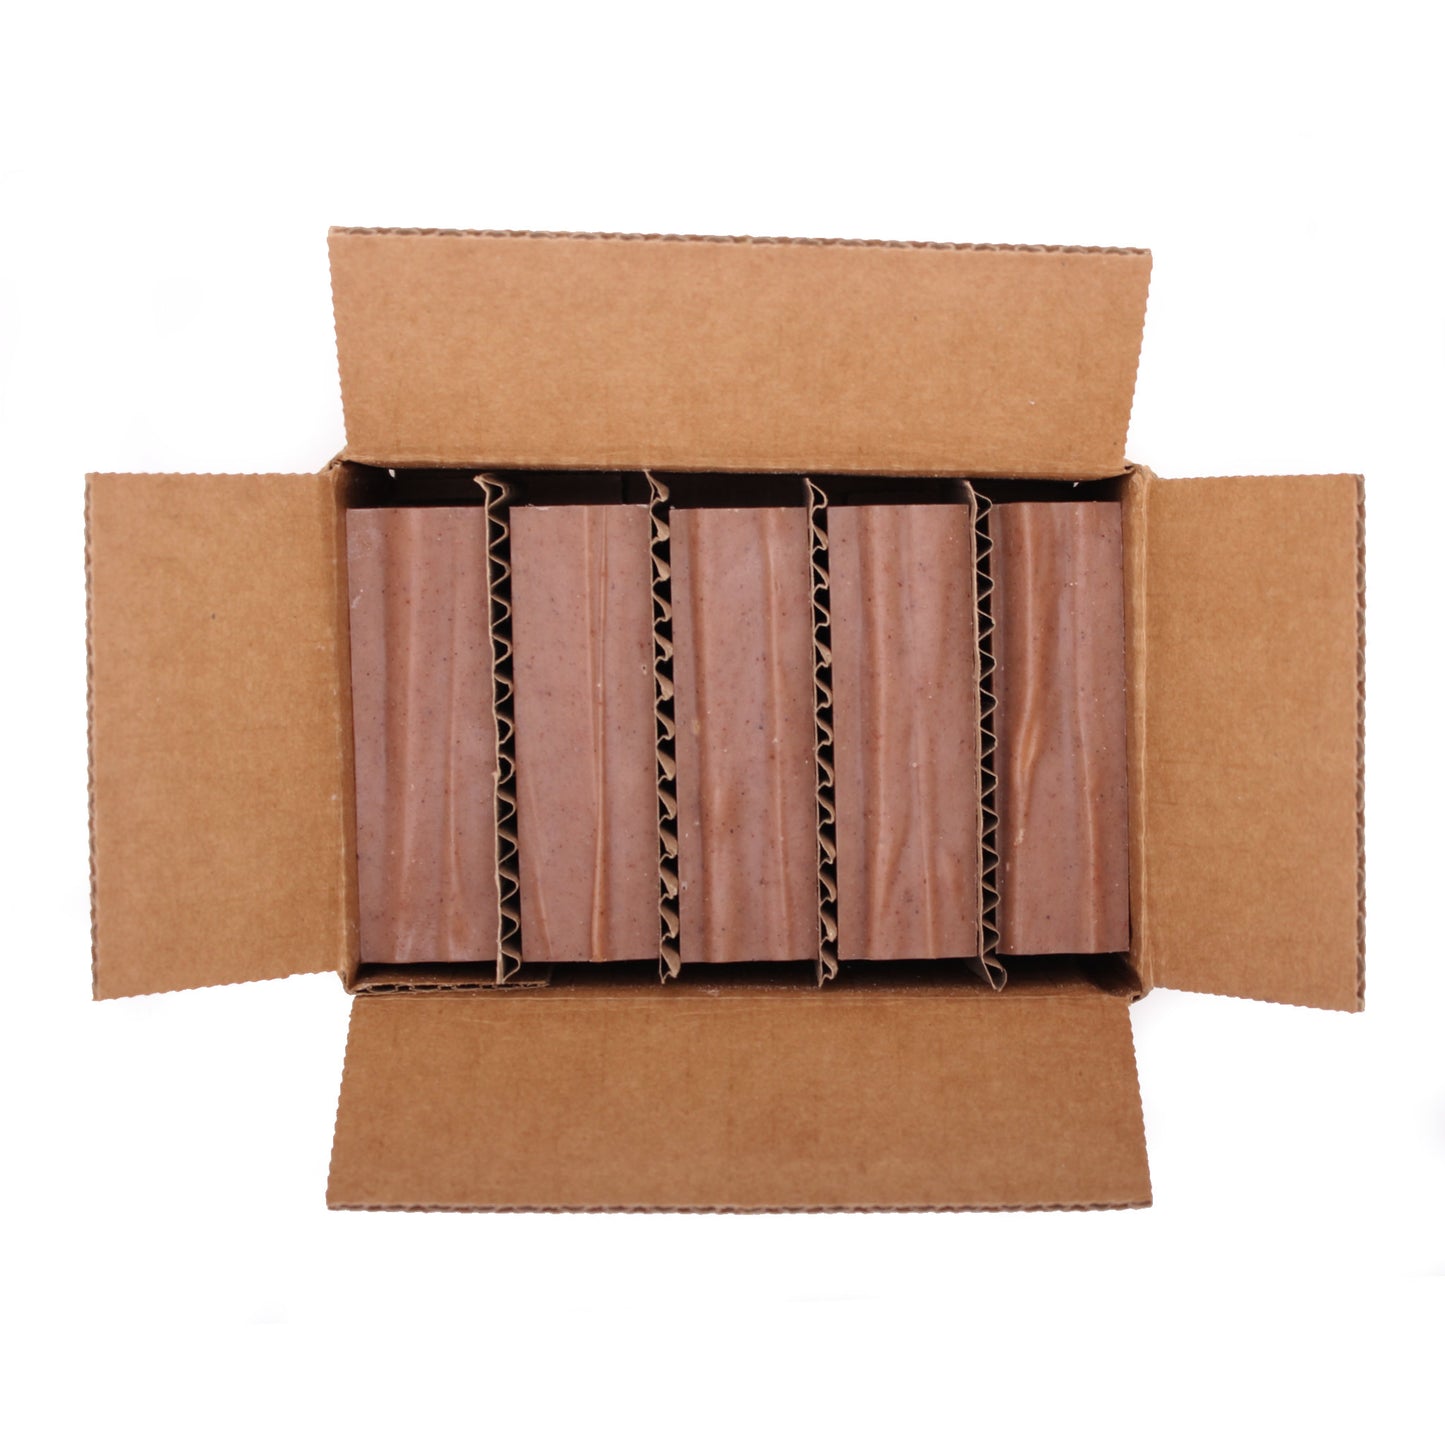 Five pack of naked Backbone cinnamon essential oil organic bar soap from ground Soap in box.